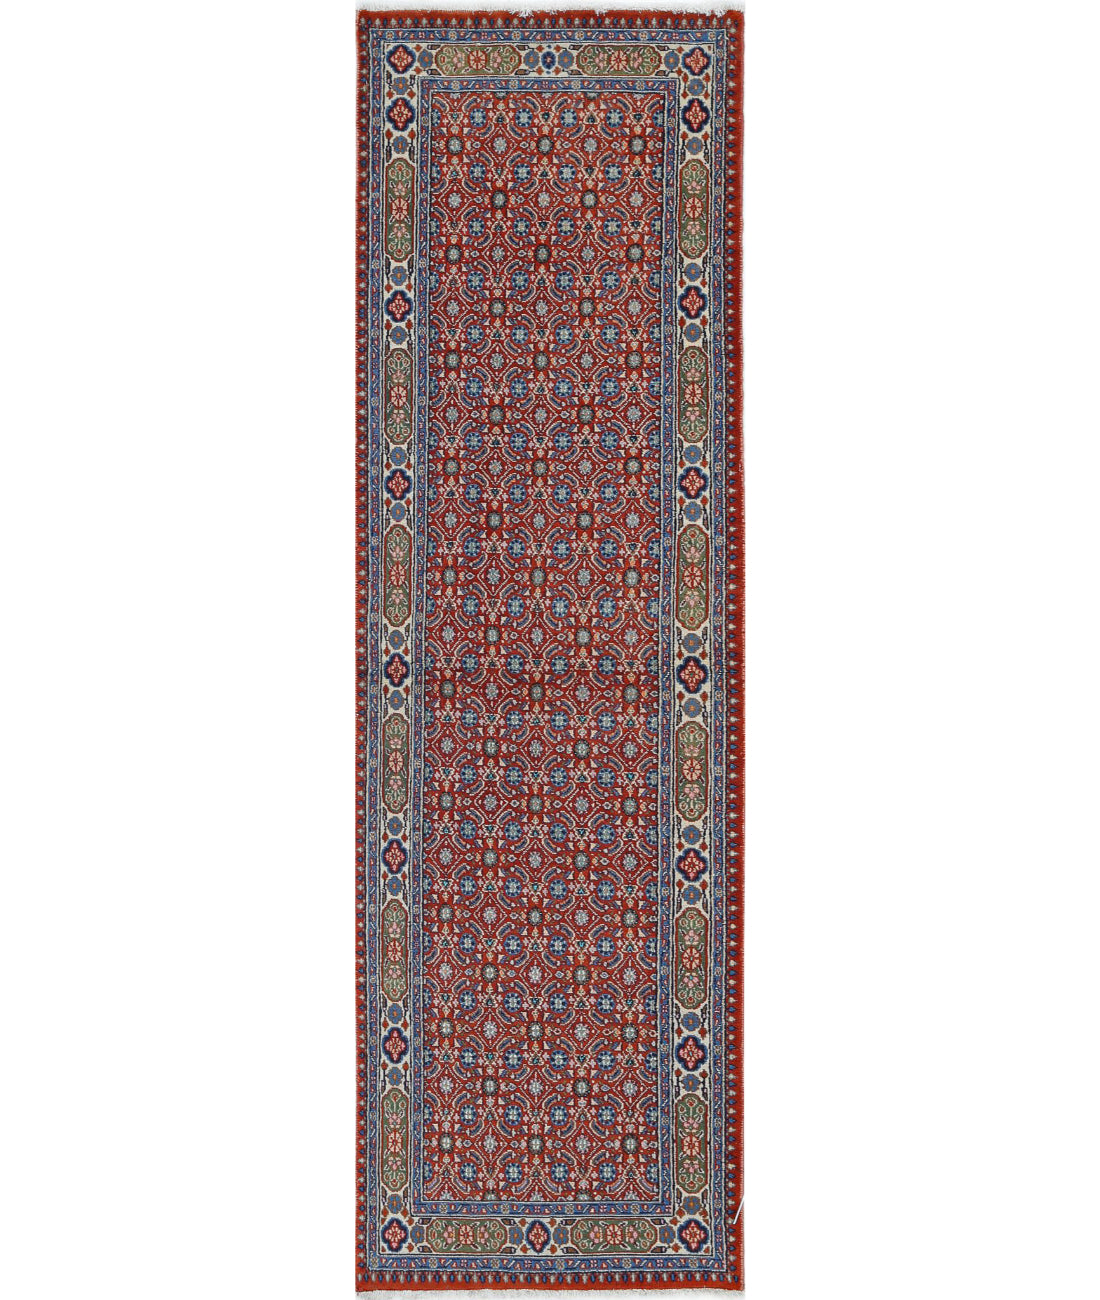 Hand Knotted Persian Tabriz Wool Rug - 1&#39;10&#39;&#39; x 6&#39;4&#39;&#39; 1&#39;10&#39;&#39; x 6&#39;4&#39;&#39; (55 X 190) / Red / Ivory